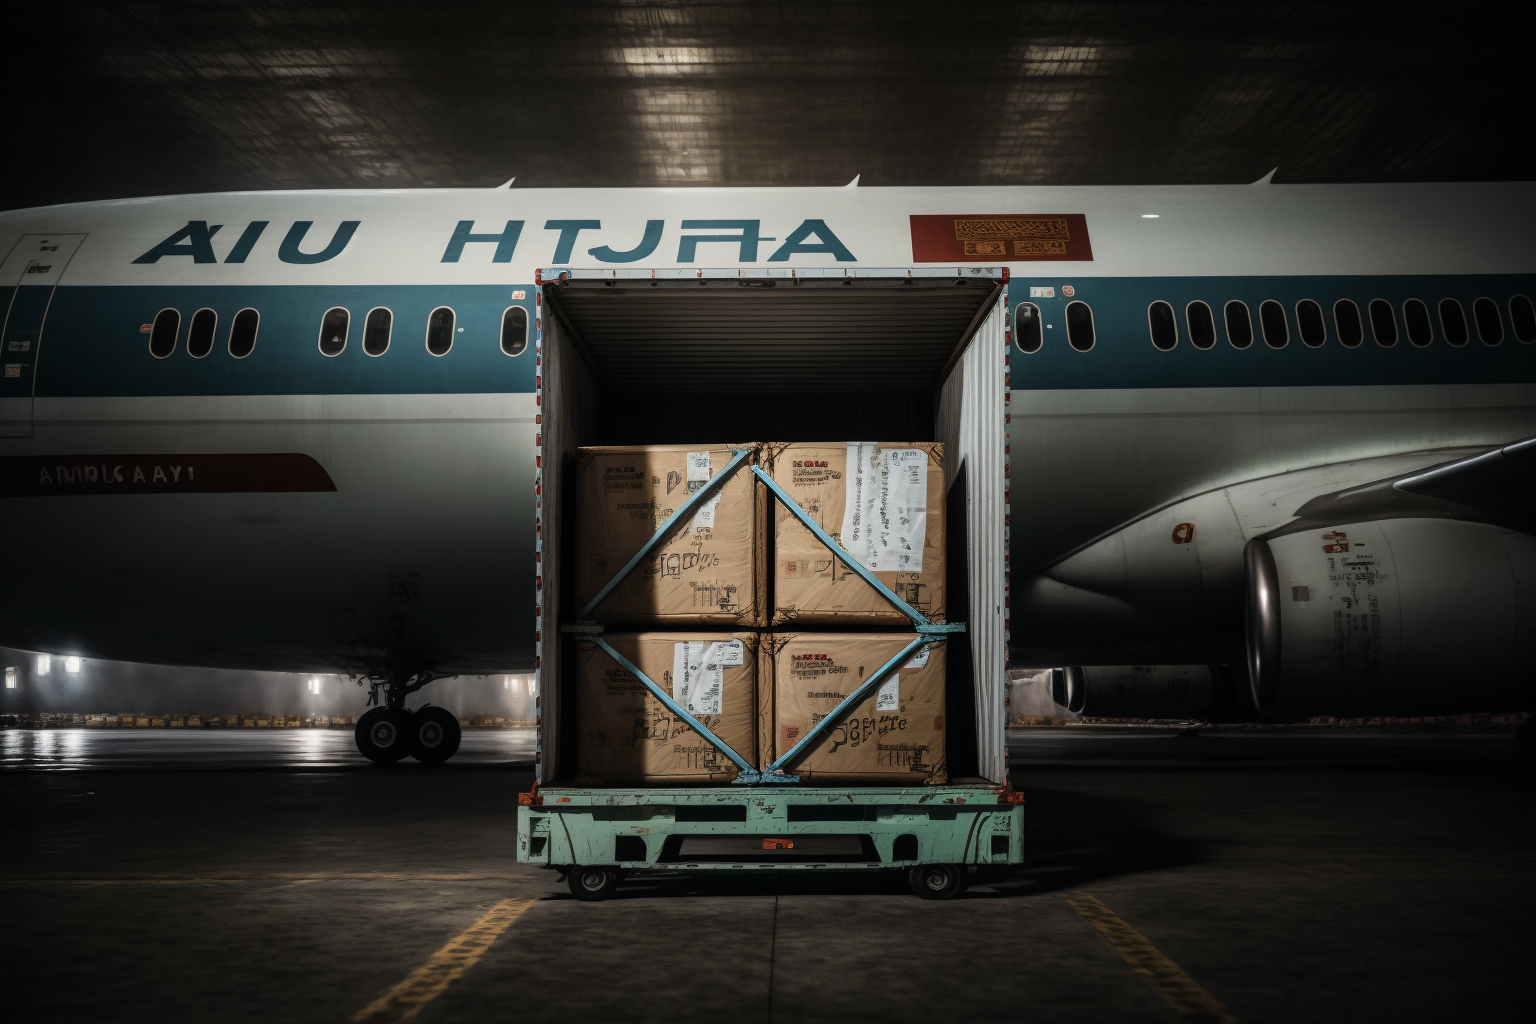 Loading cargo into an airplane